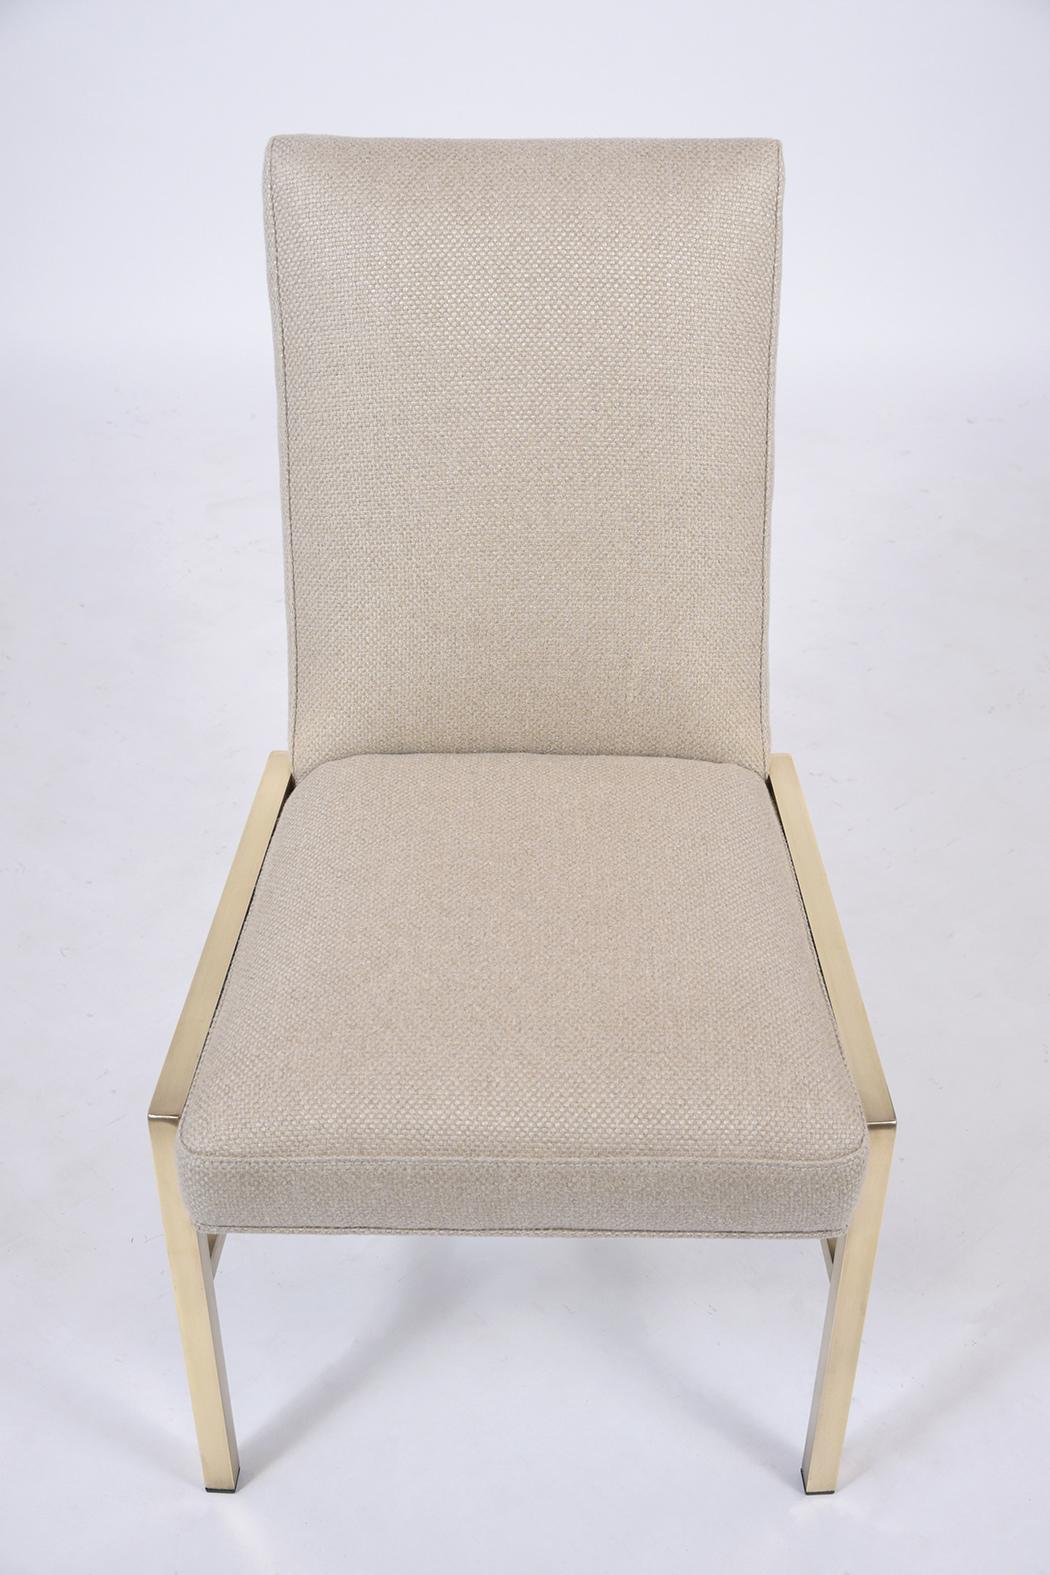 Restored Mastercraft Mid-Century Brass Side Chairs with Beige Wool Upholstery For Sale 2